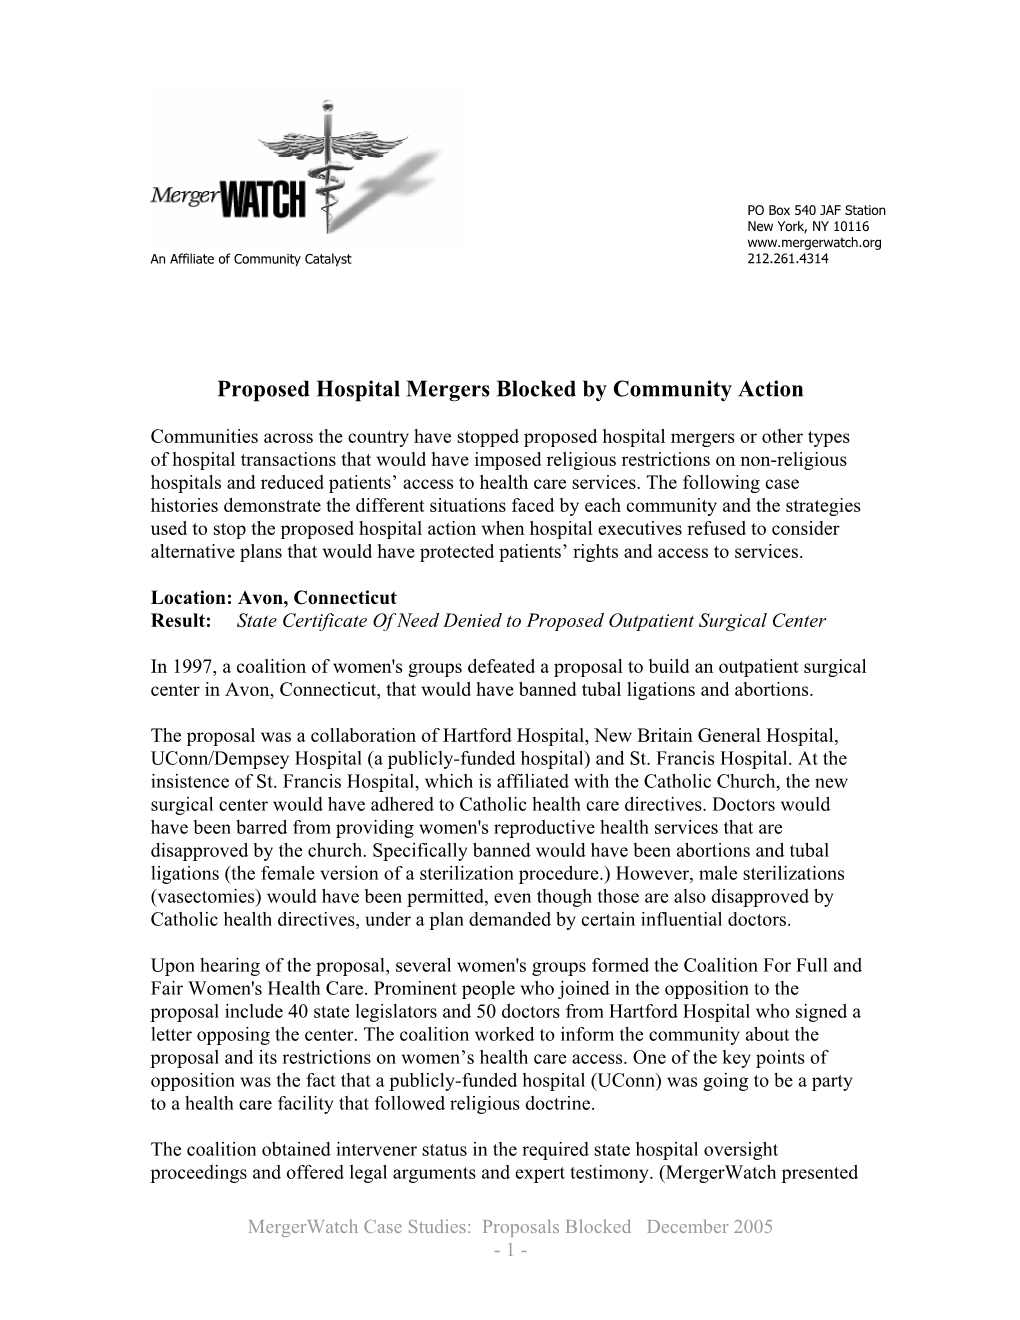 Proposed Hospital Mergers Blocked by Community Action